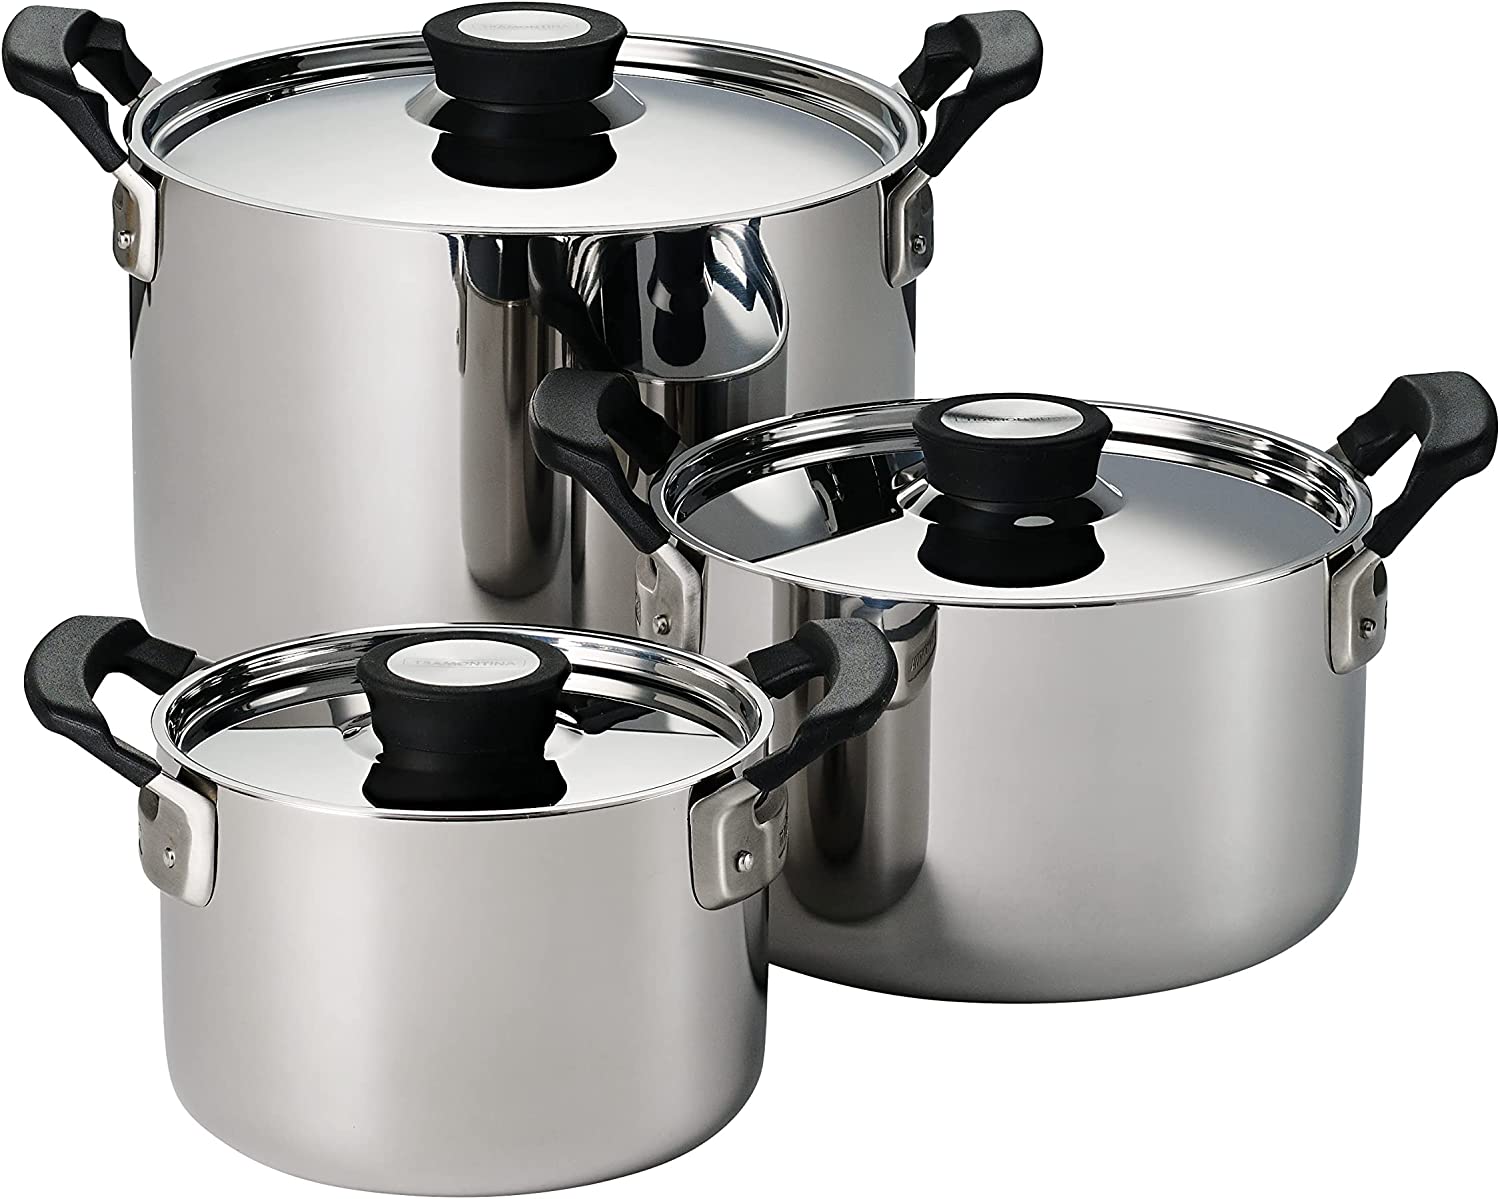 Stainless Clad 6-Piece Set